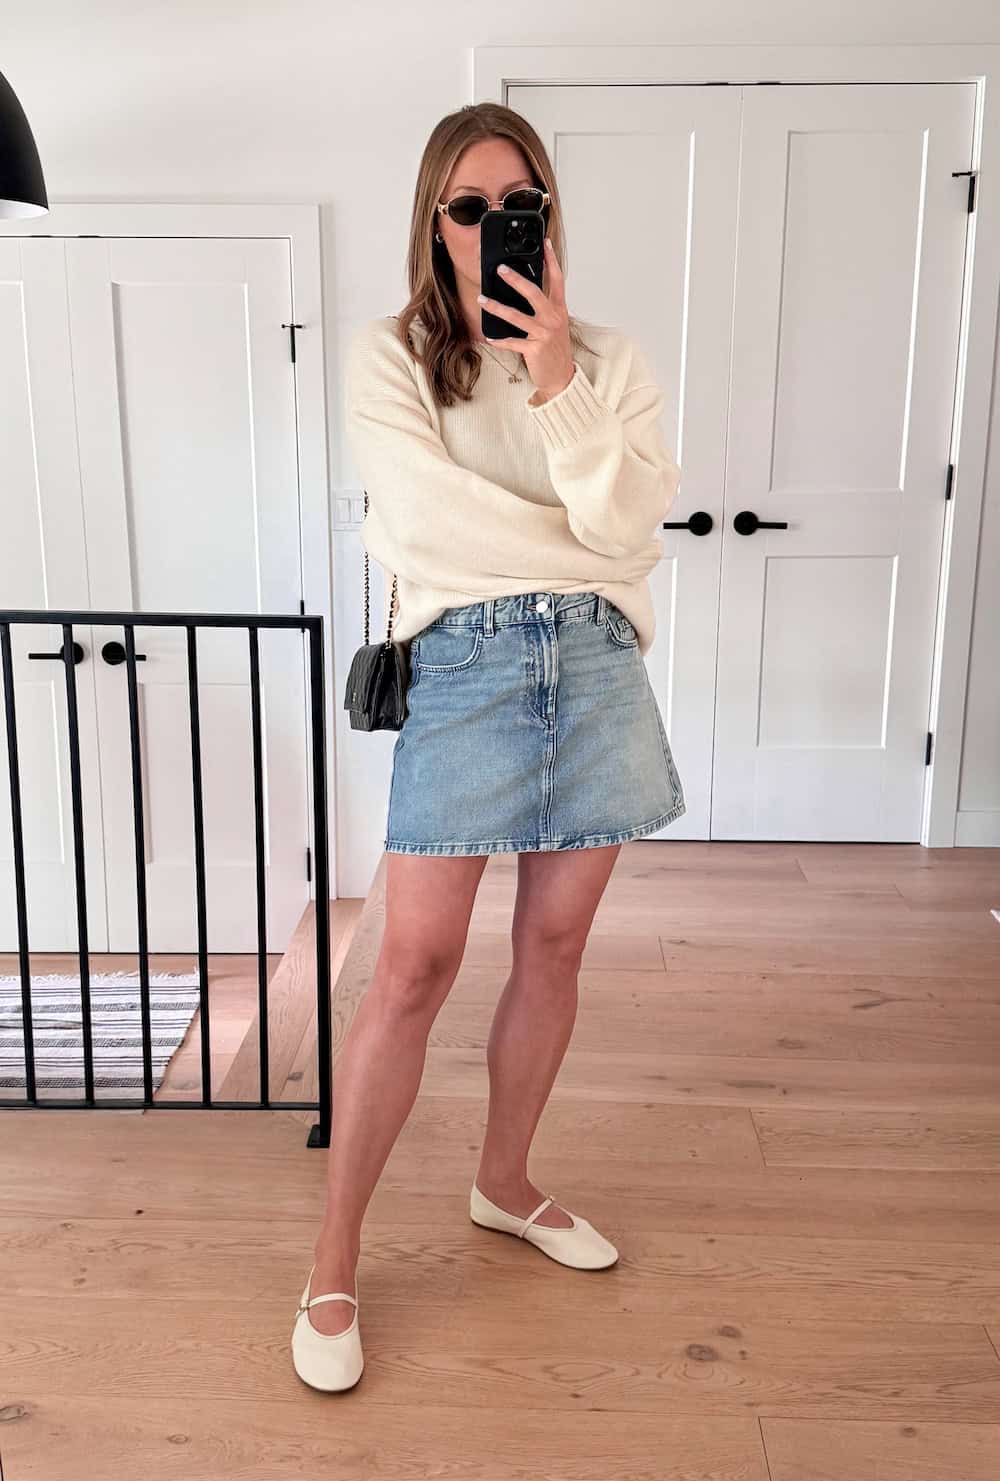 Christal wearing a denim skirt with a cream sweater and cream mary jane flats.